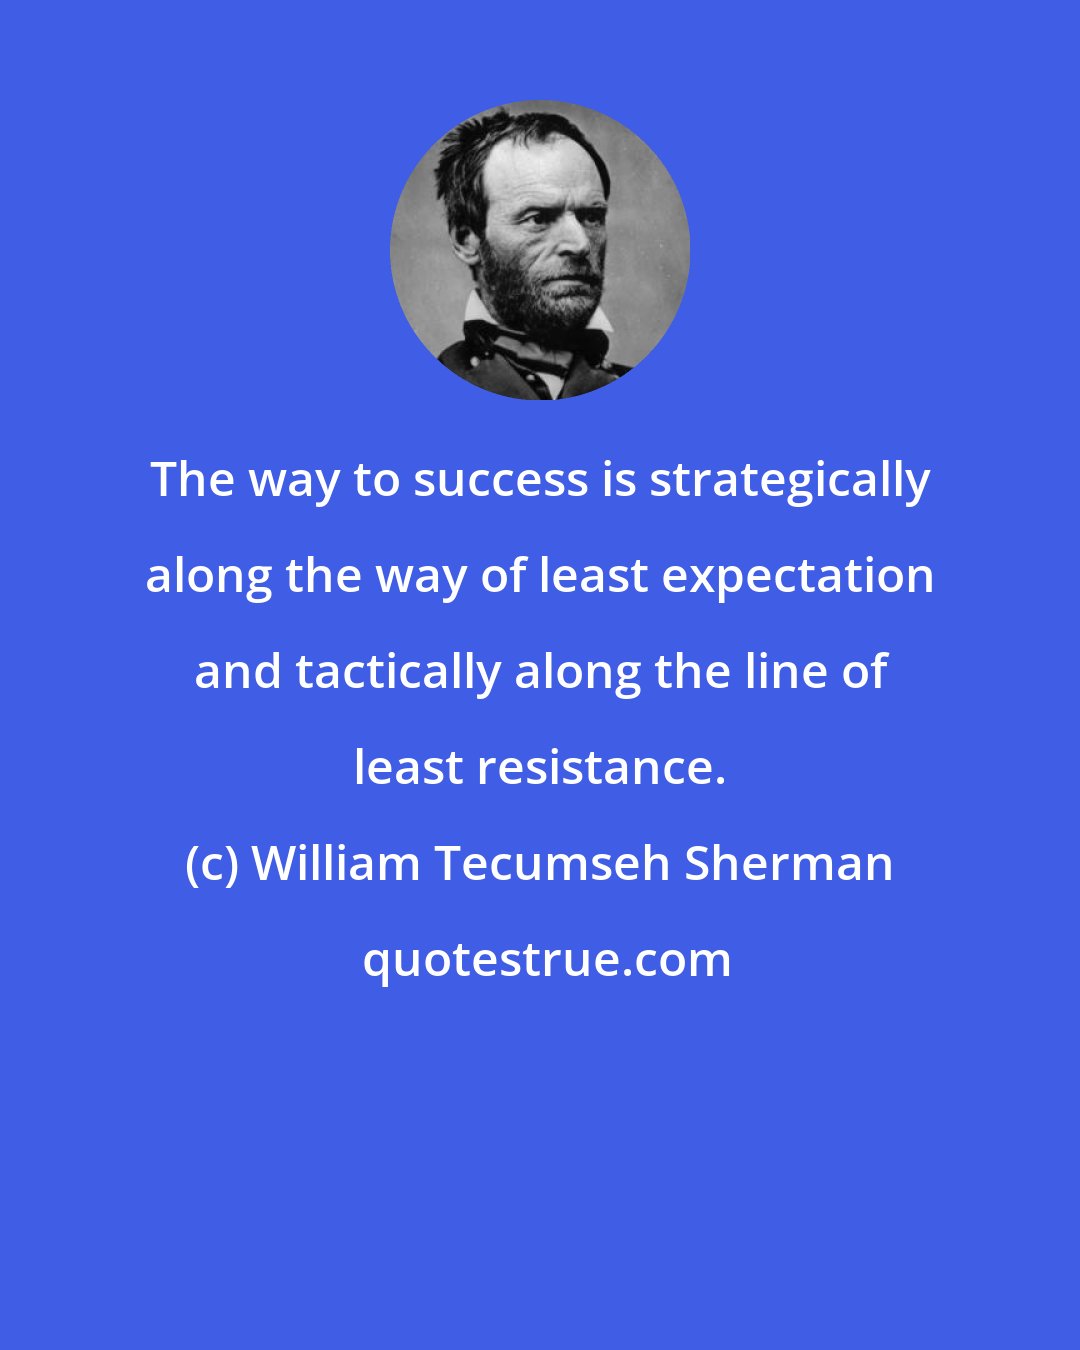 William Tecumseh Sherman: The way to success is strategically along the way of least expectation and tactically along the line of least resistance.